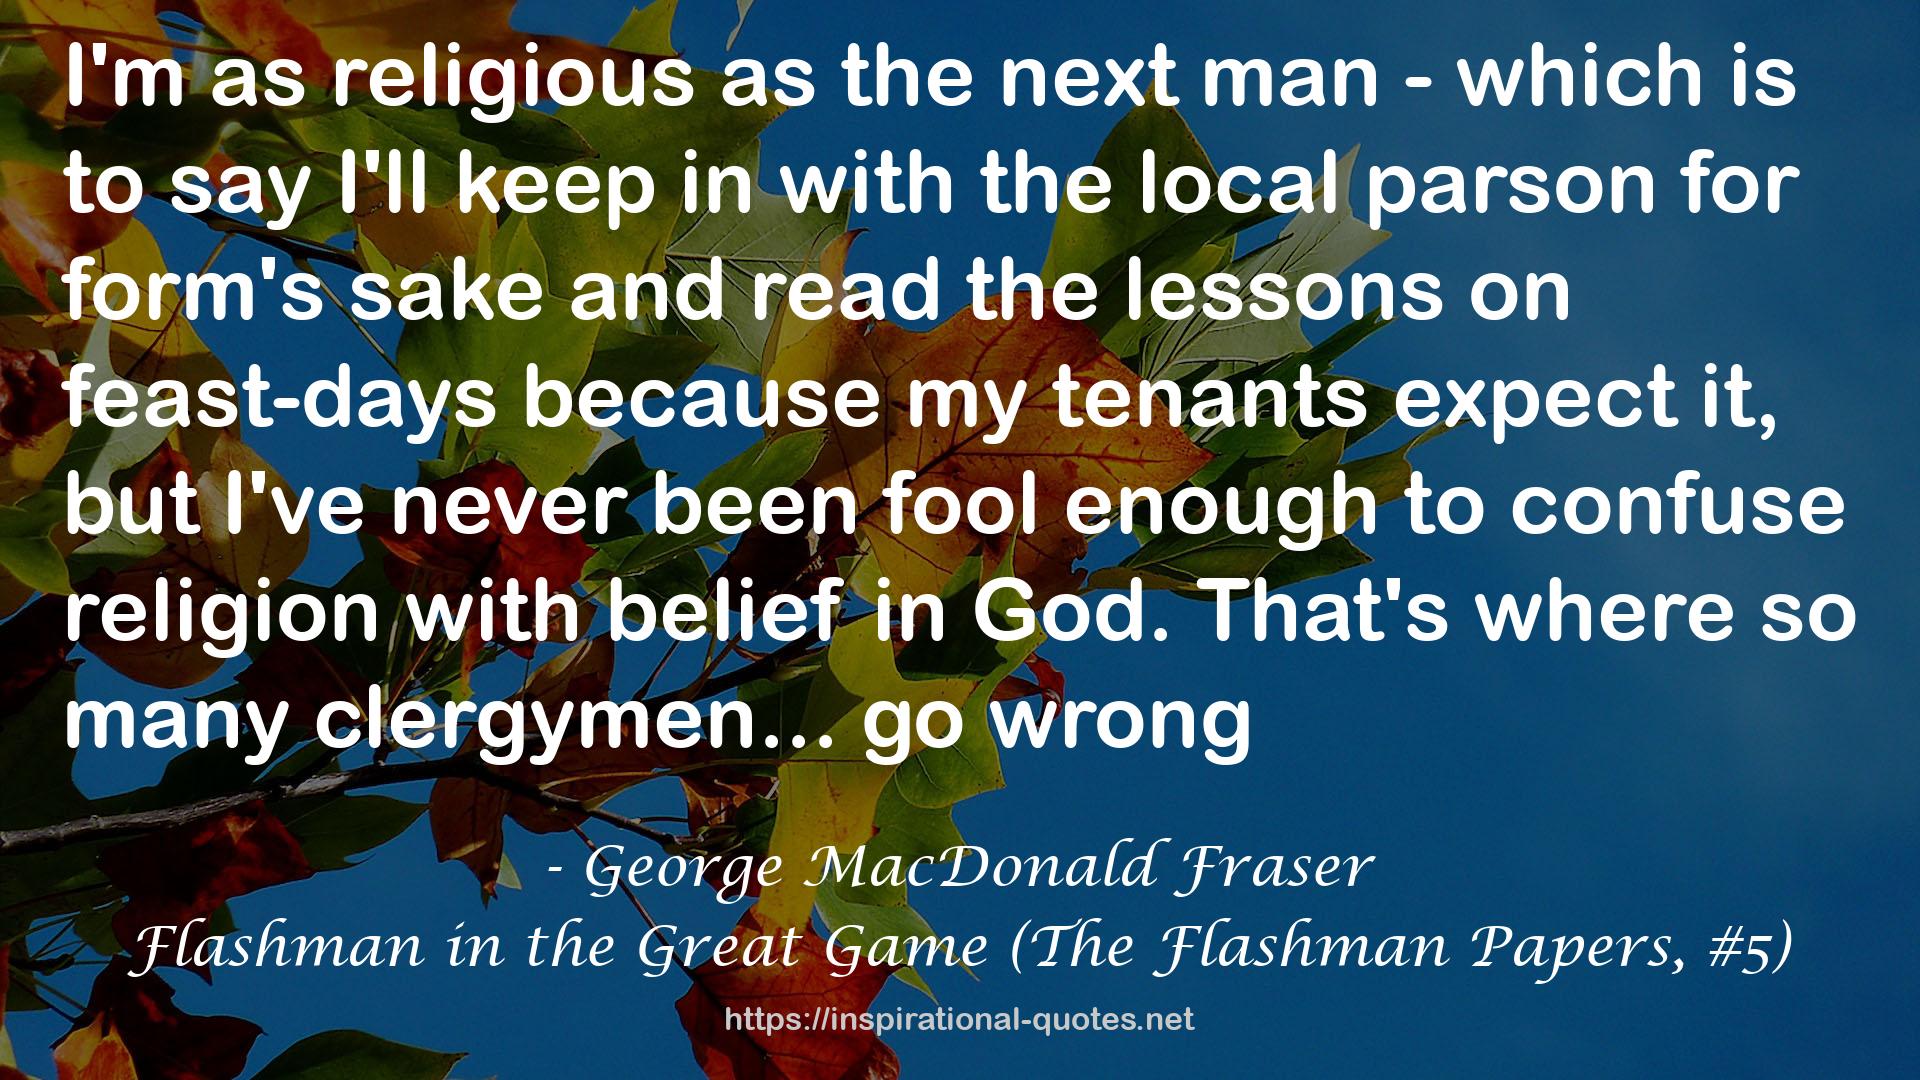 Flashman in the Great Game (The Flashman Papers, #5) QUOTES